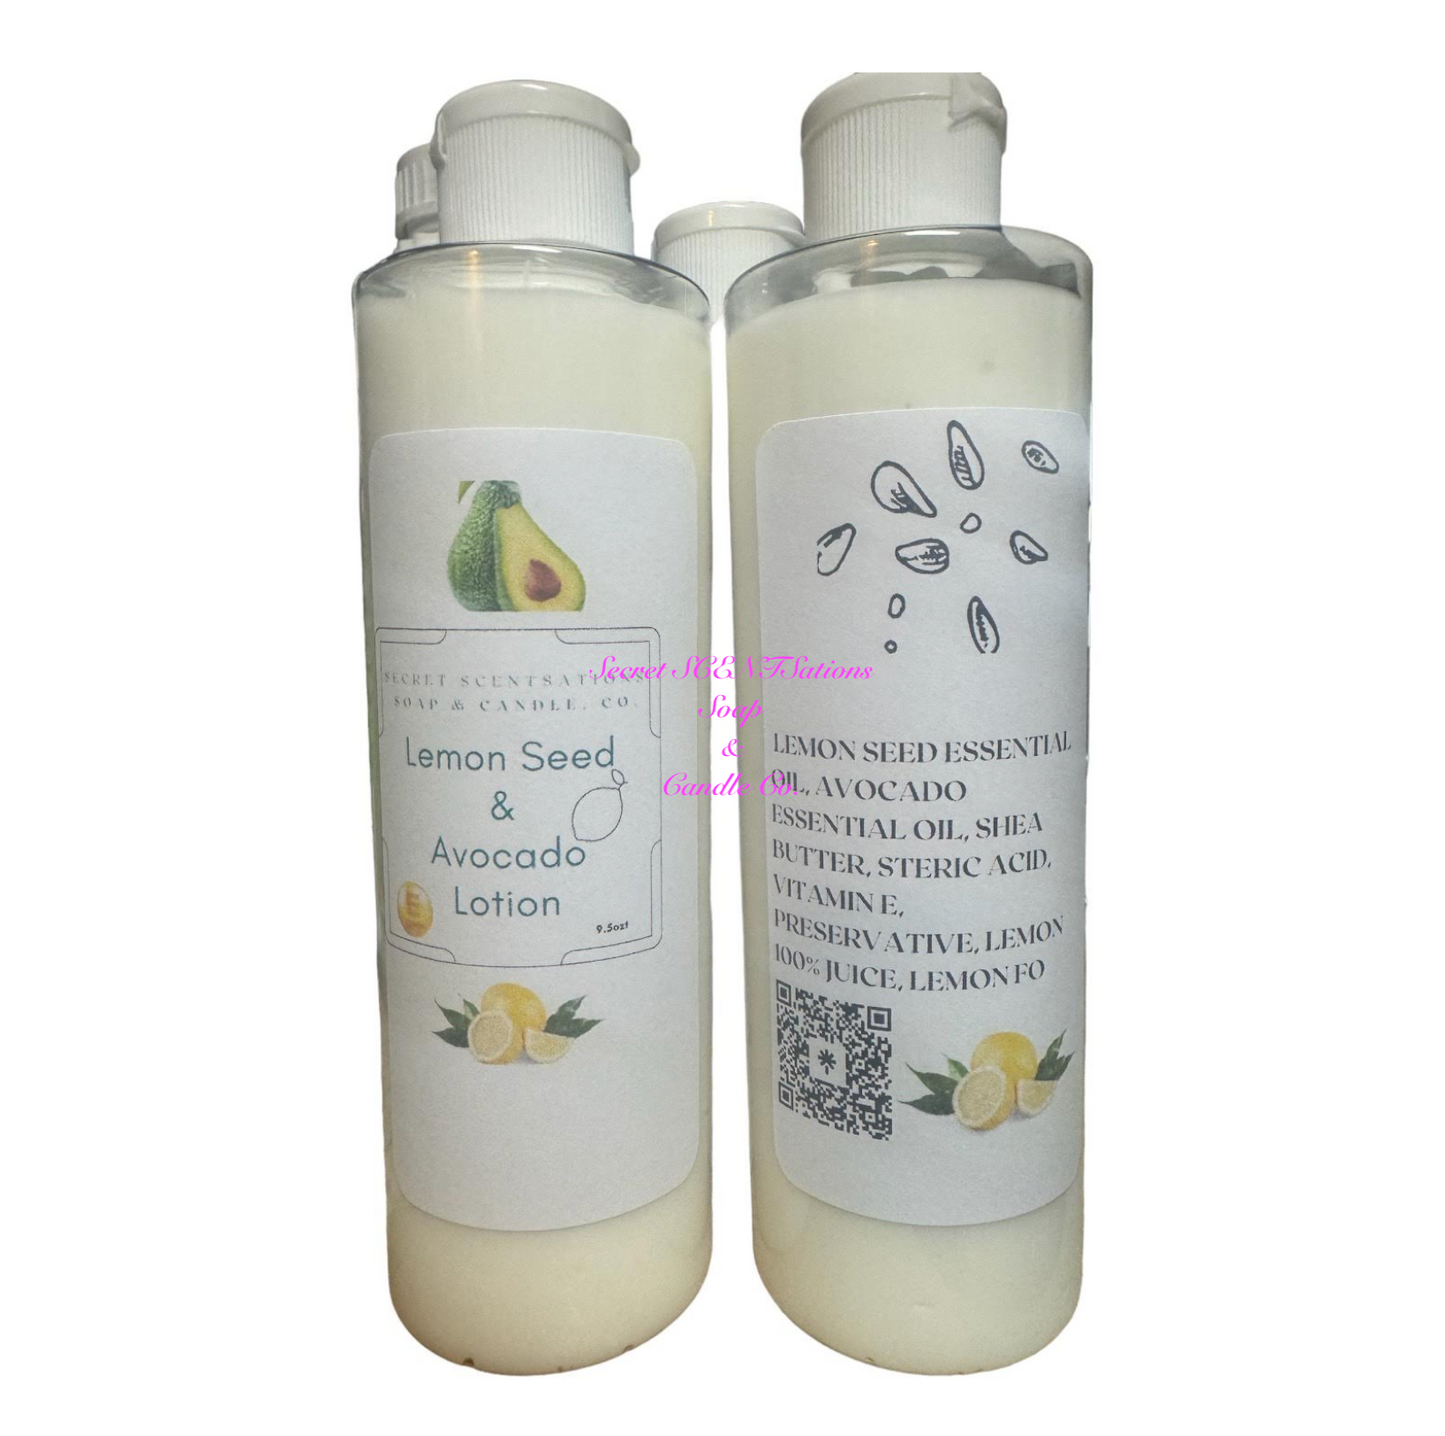 Lemon Seed and Avocado essential Oil Lotion with Vitamin E 9.5 ounces